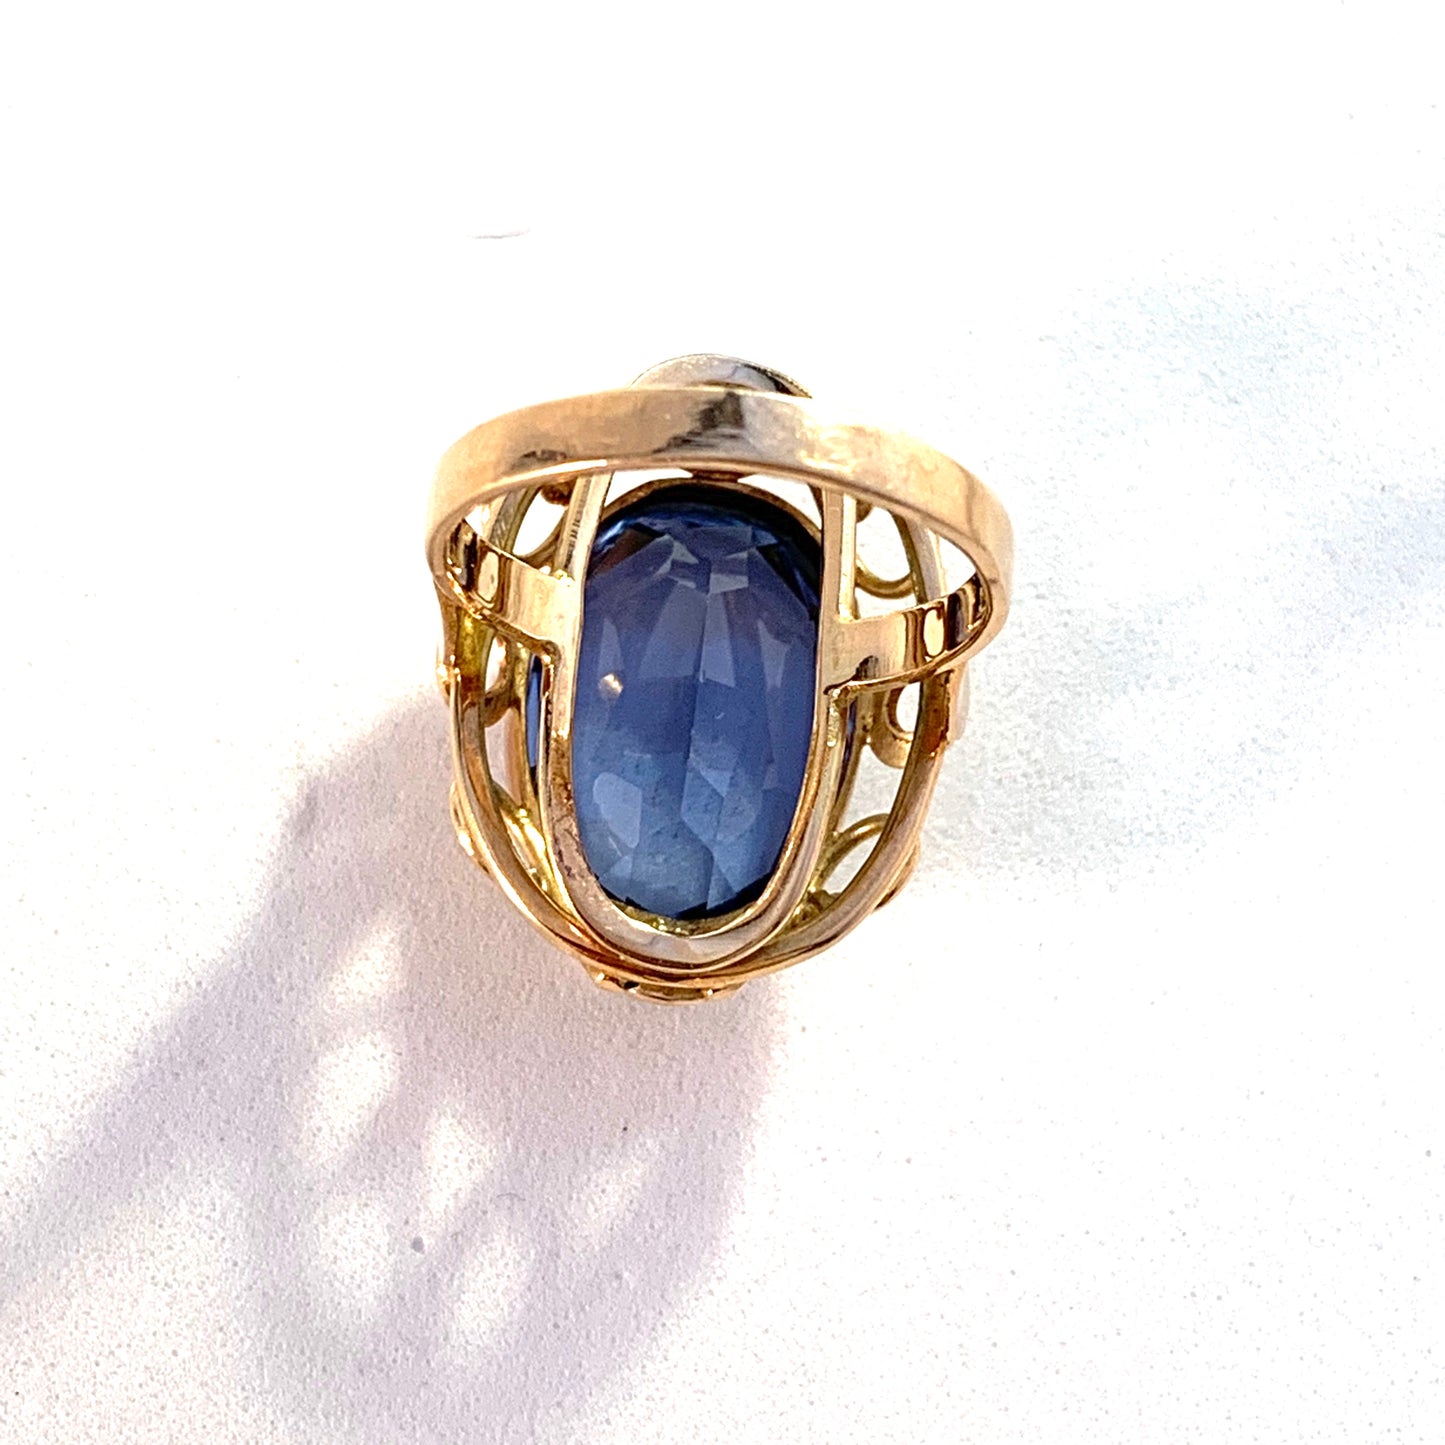 Eastern Europe 1940-50s Mid Century 14k Gold Synthetic Spinel Cocktail Dinner Ring.